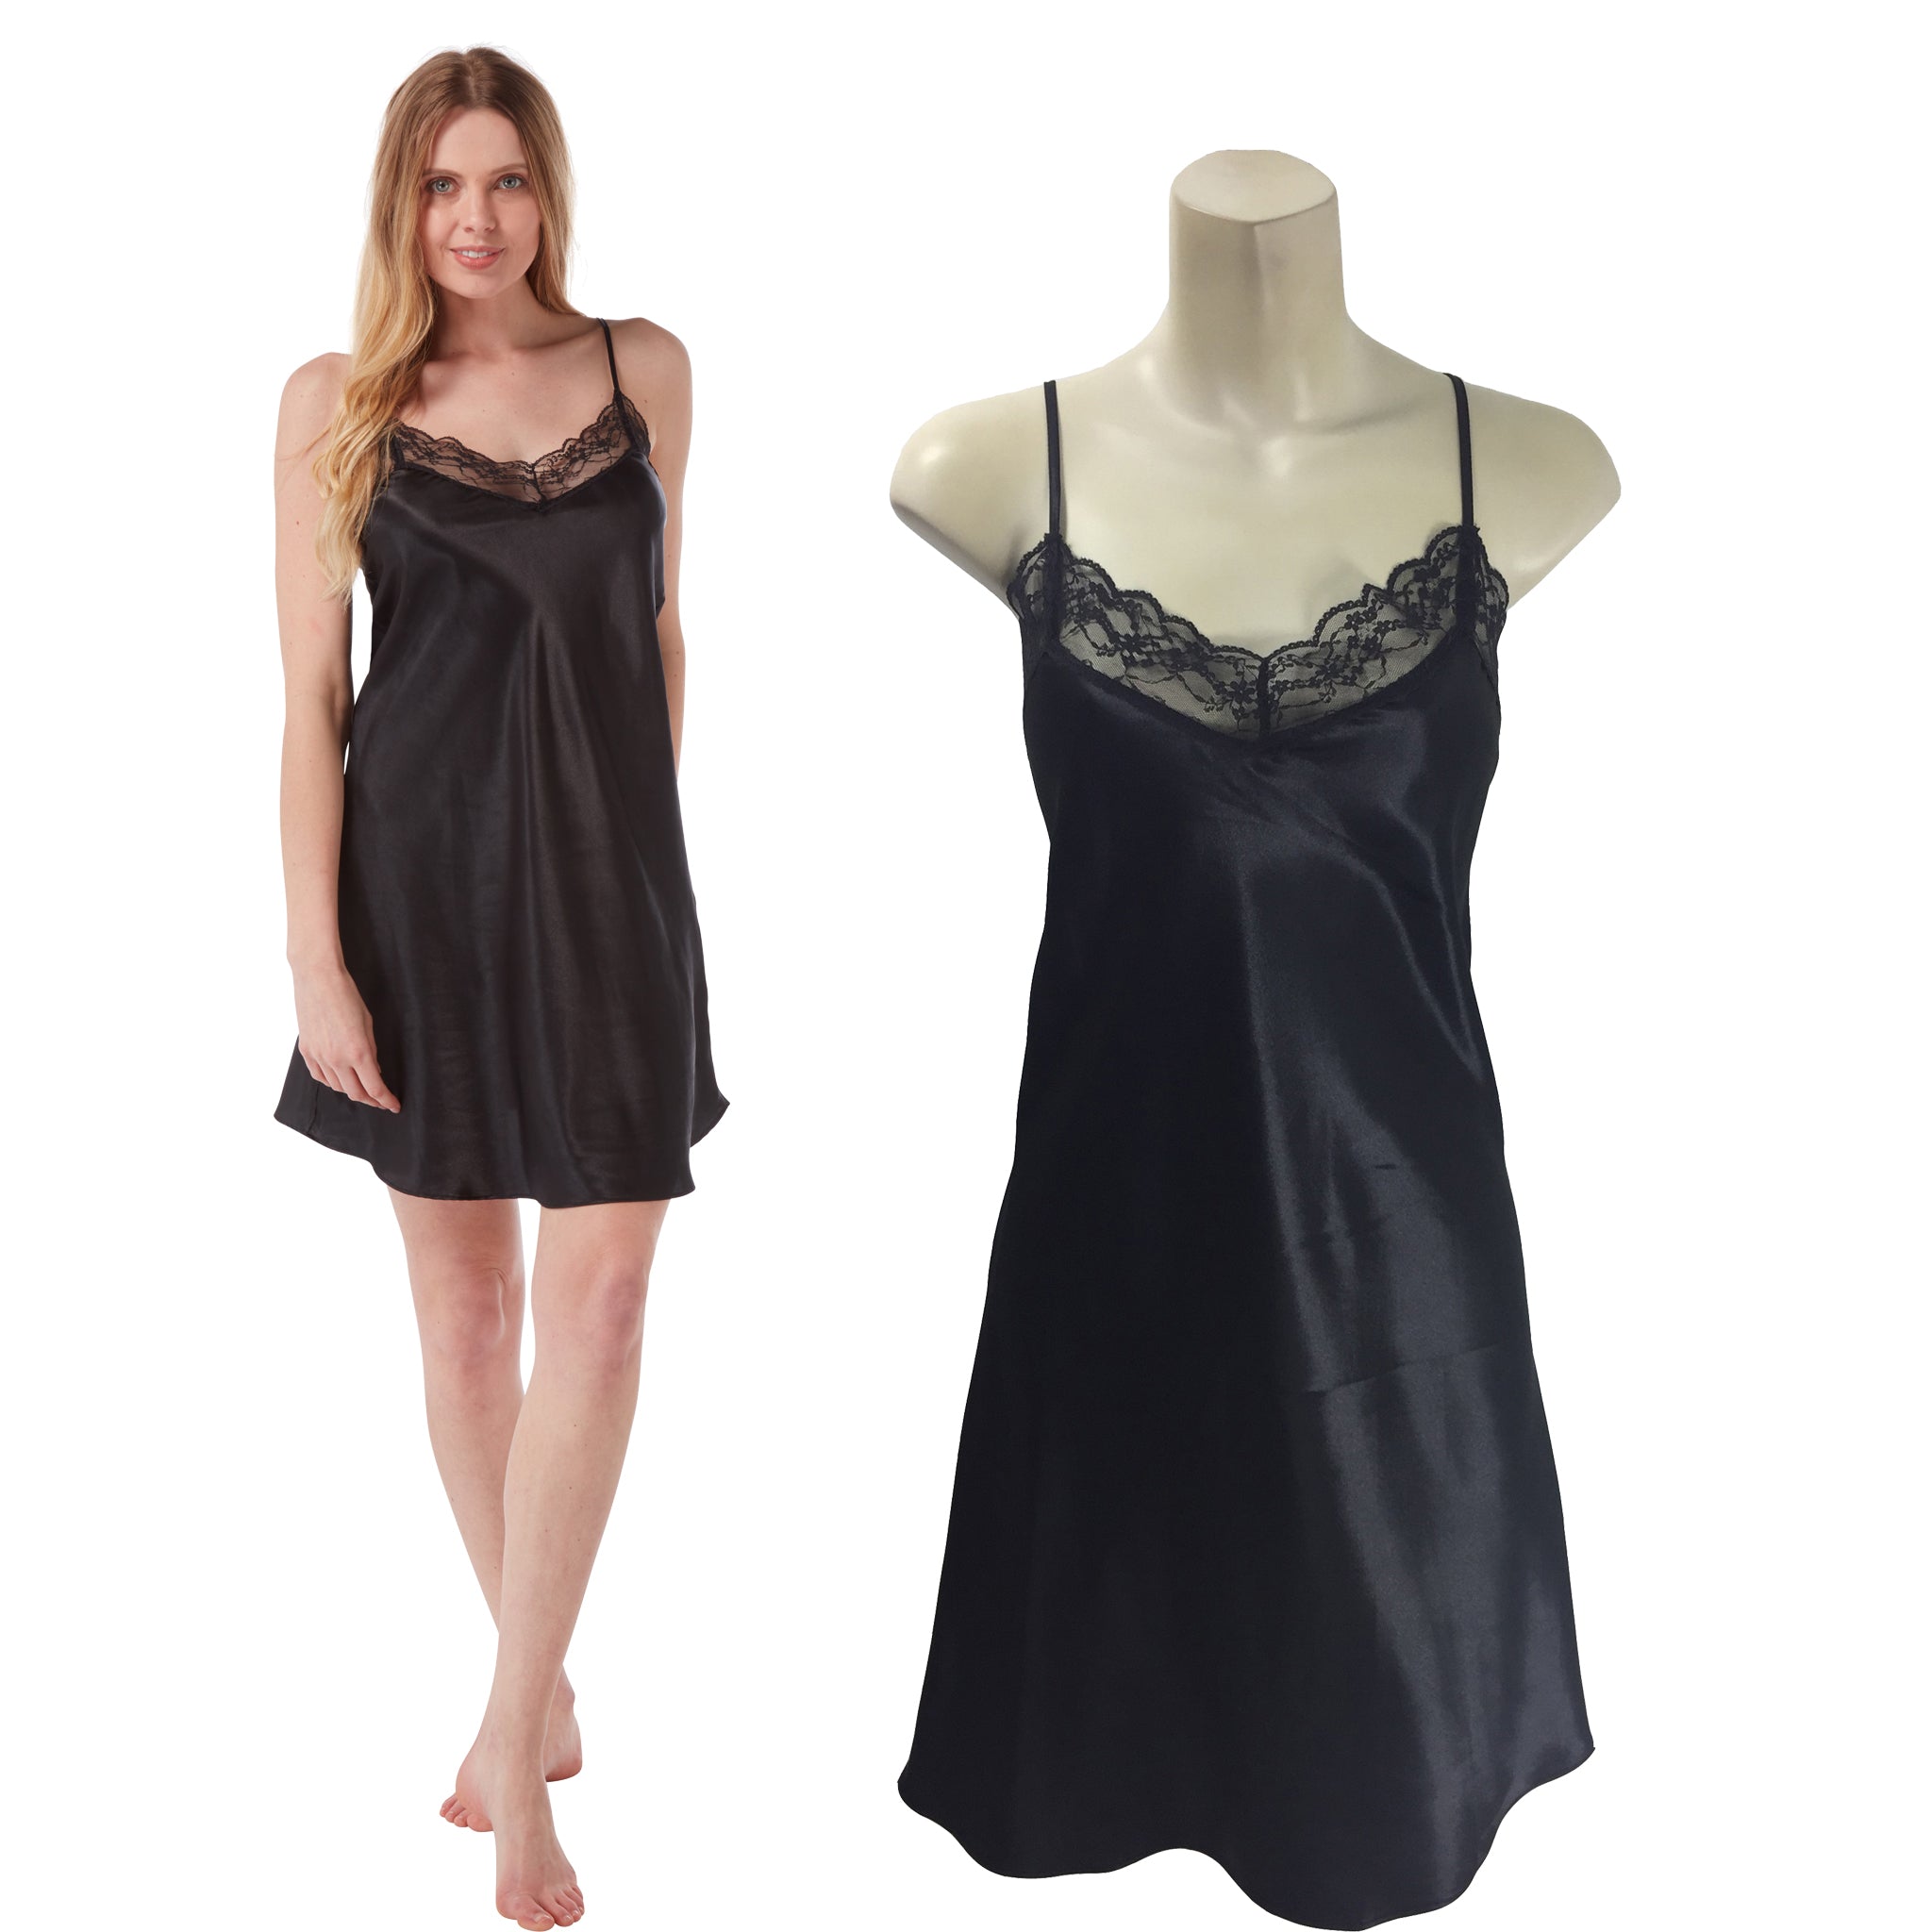 https://justforyouboutique.co.uk/cdn/shop/files/ladies-sexy-silky-satin-lace-black-chemise-nightie-plus-size-8-12-14-16-18-20-22-24-26-28-30-32-just-for-you-boutique.jpg?v=1686478350